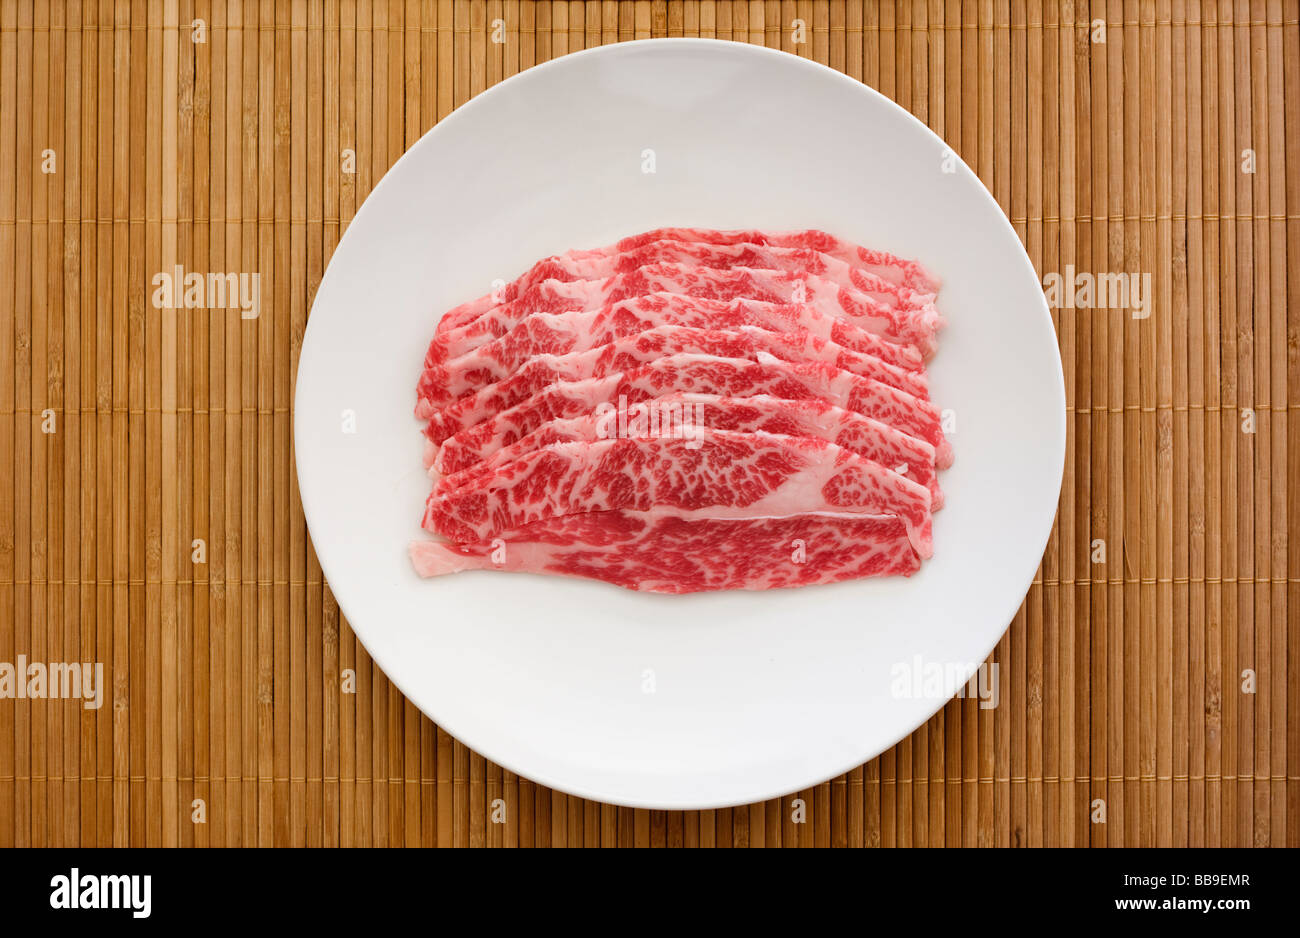 Marbled Japanese wagyu beef uncooked Stock Photo